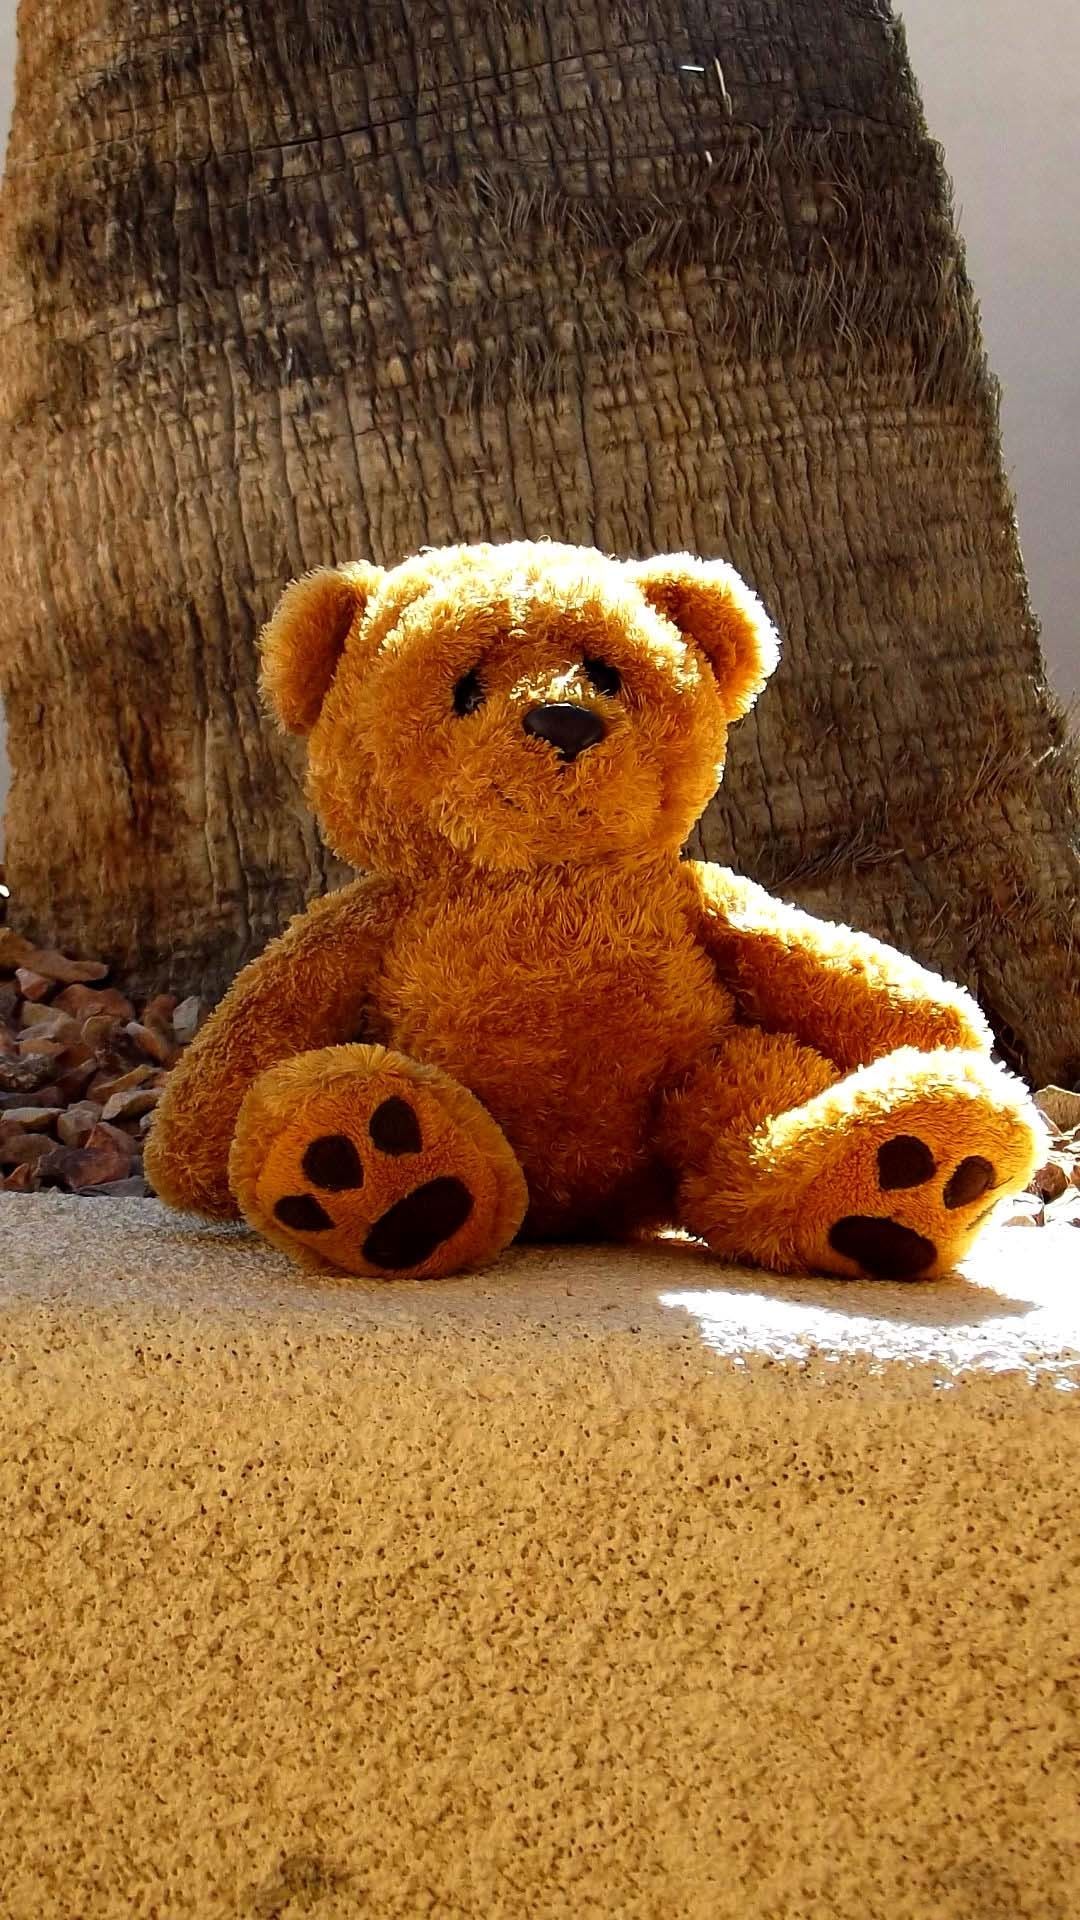 Cute teddy bear iPhone 6 wallpaper. Tap to see more iPhone